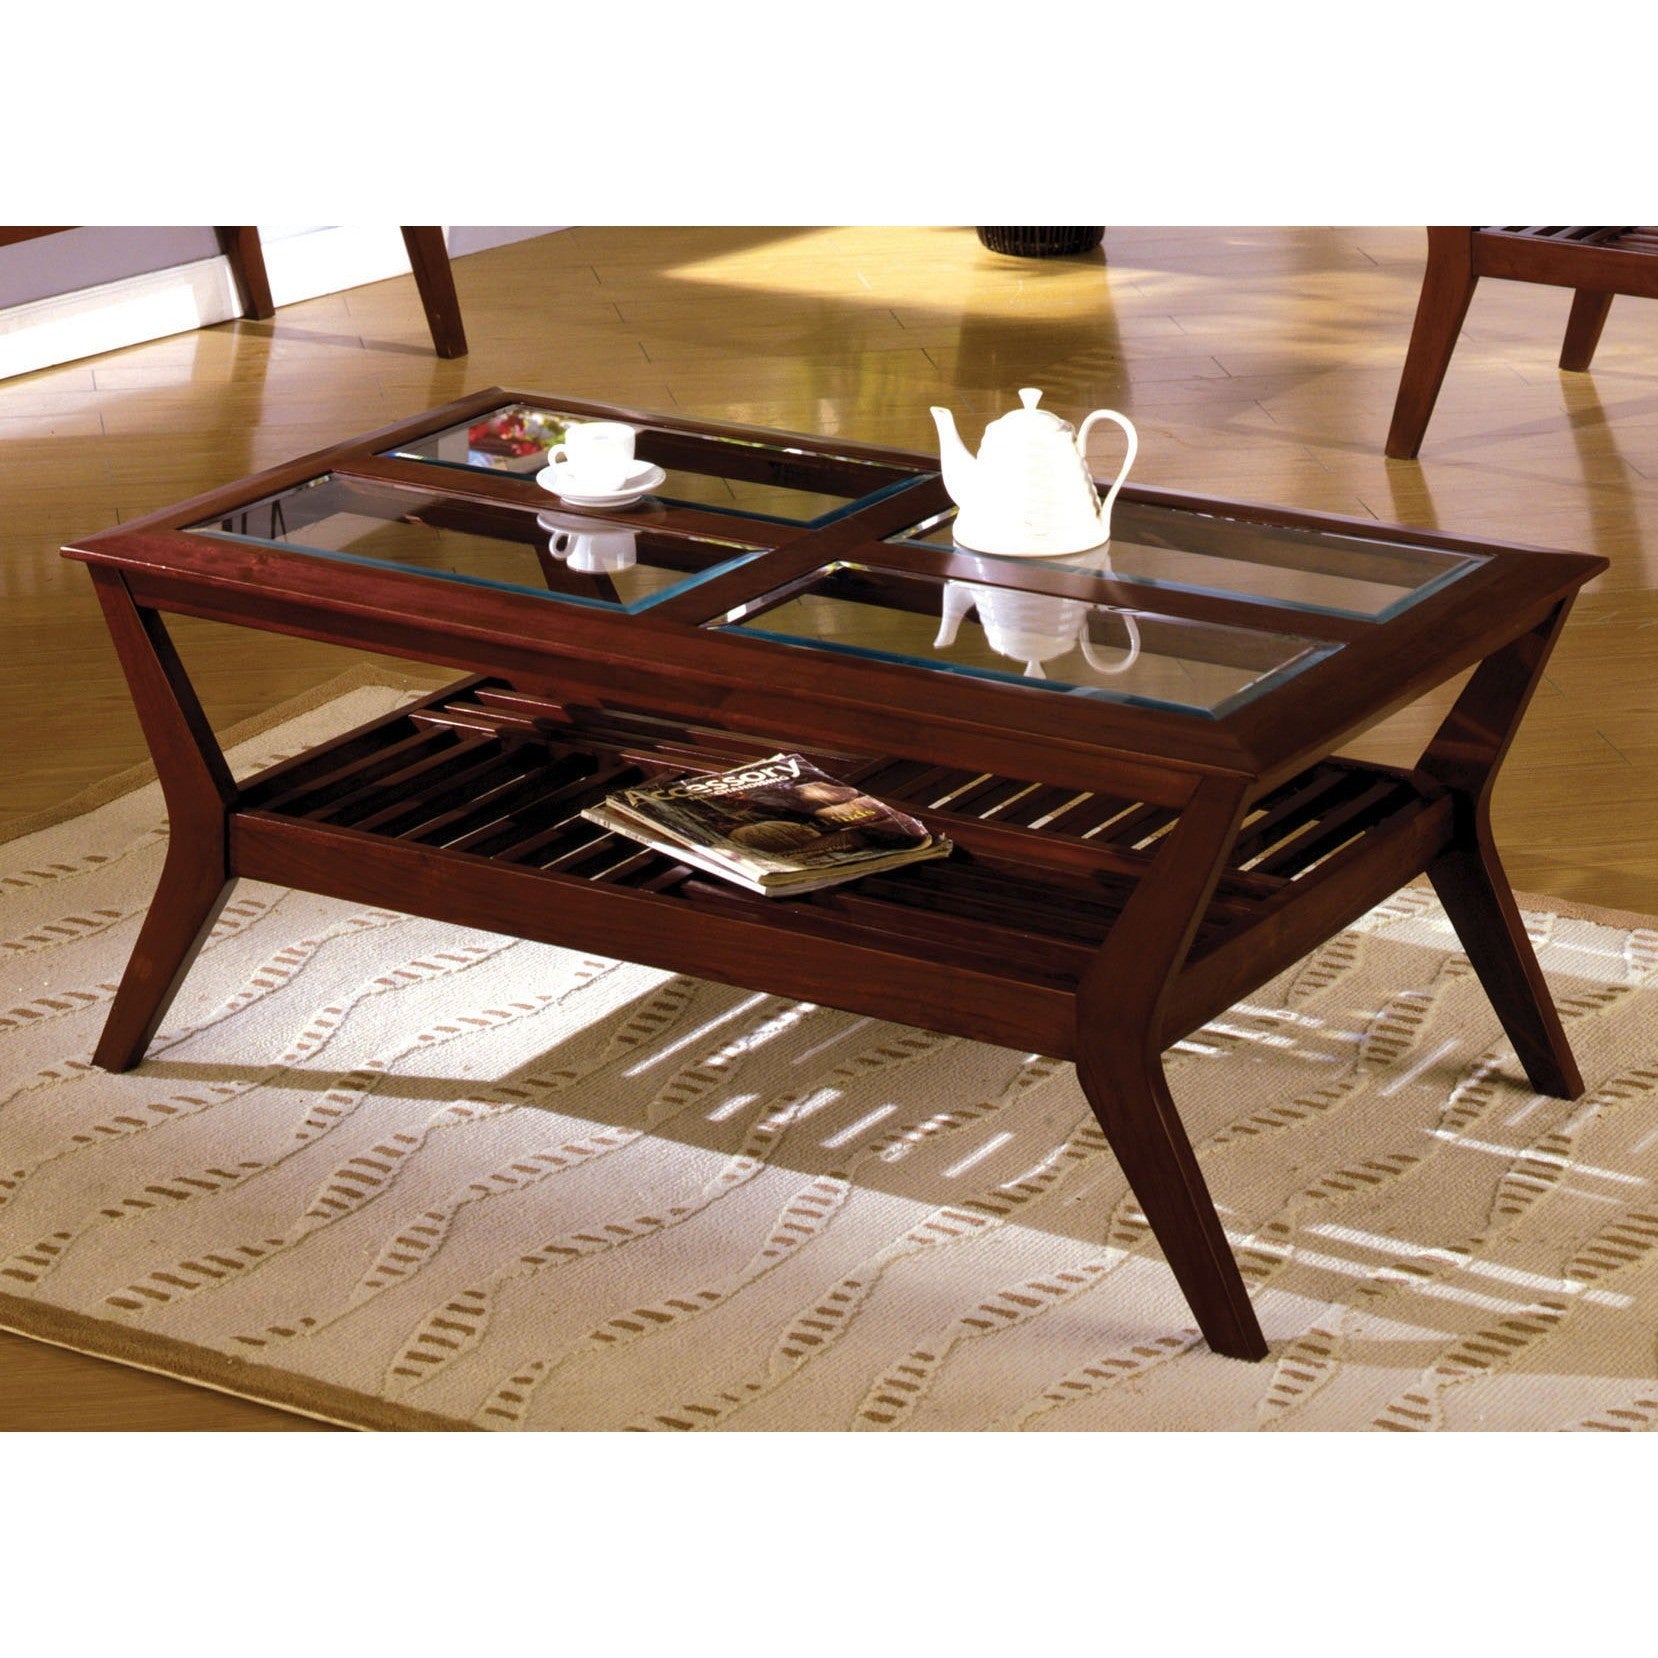 Sorensin Transitional Style Glass Top Coffee Table In Dark Cherry Coffee Table Direct